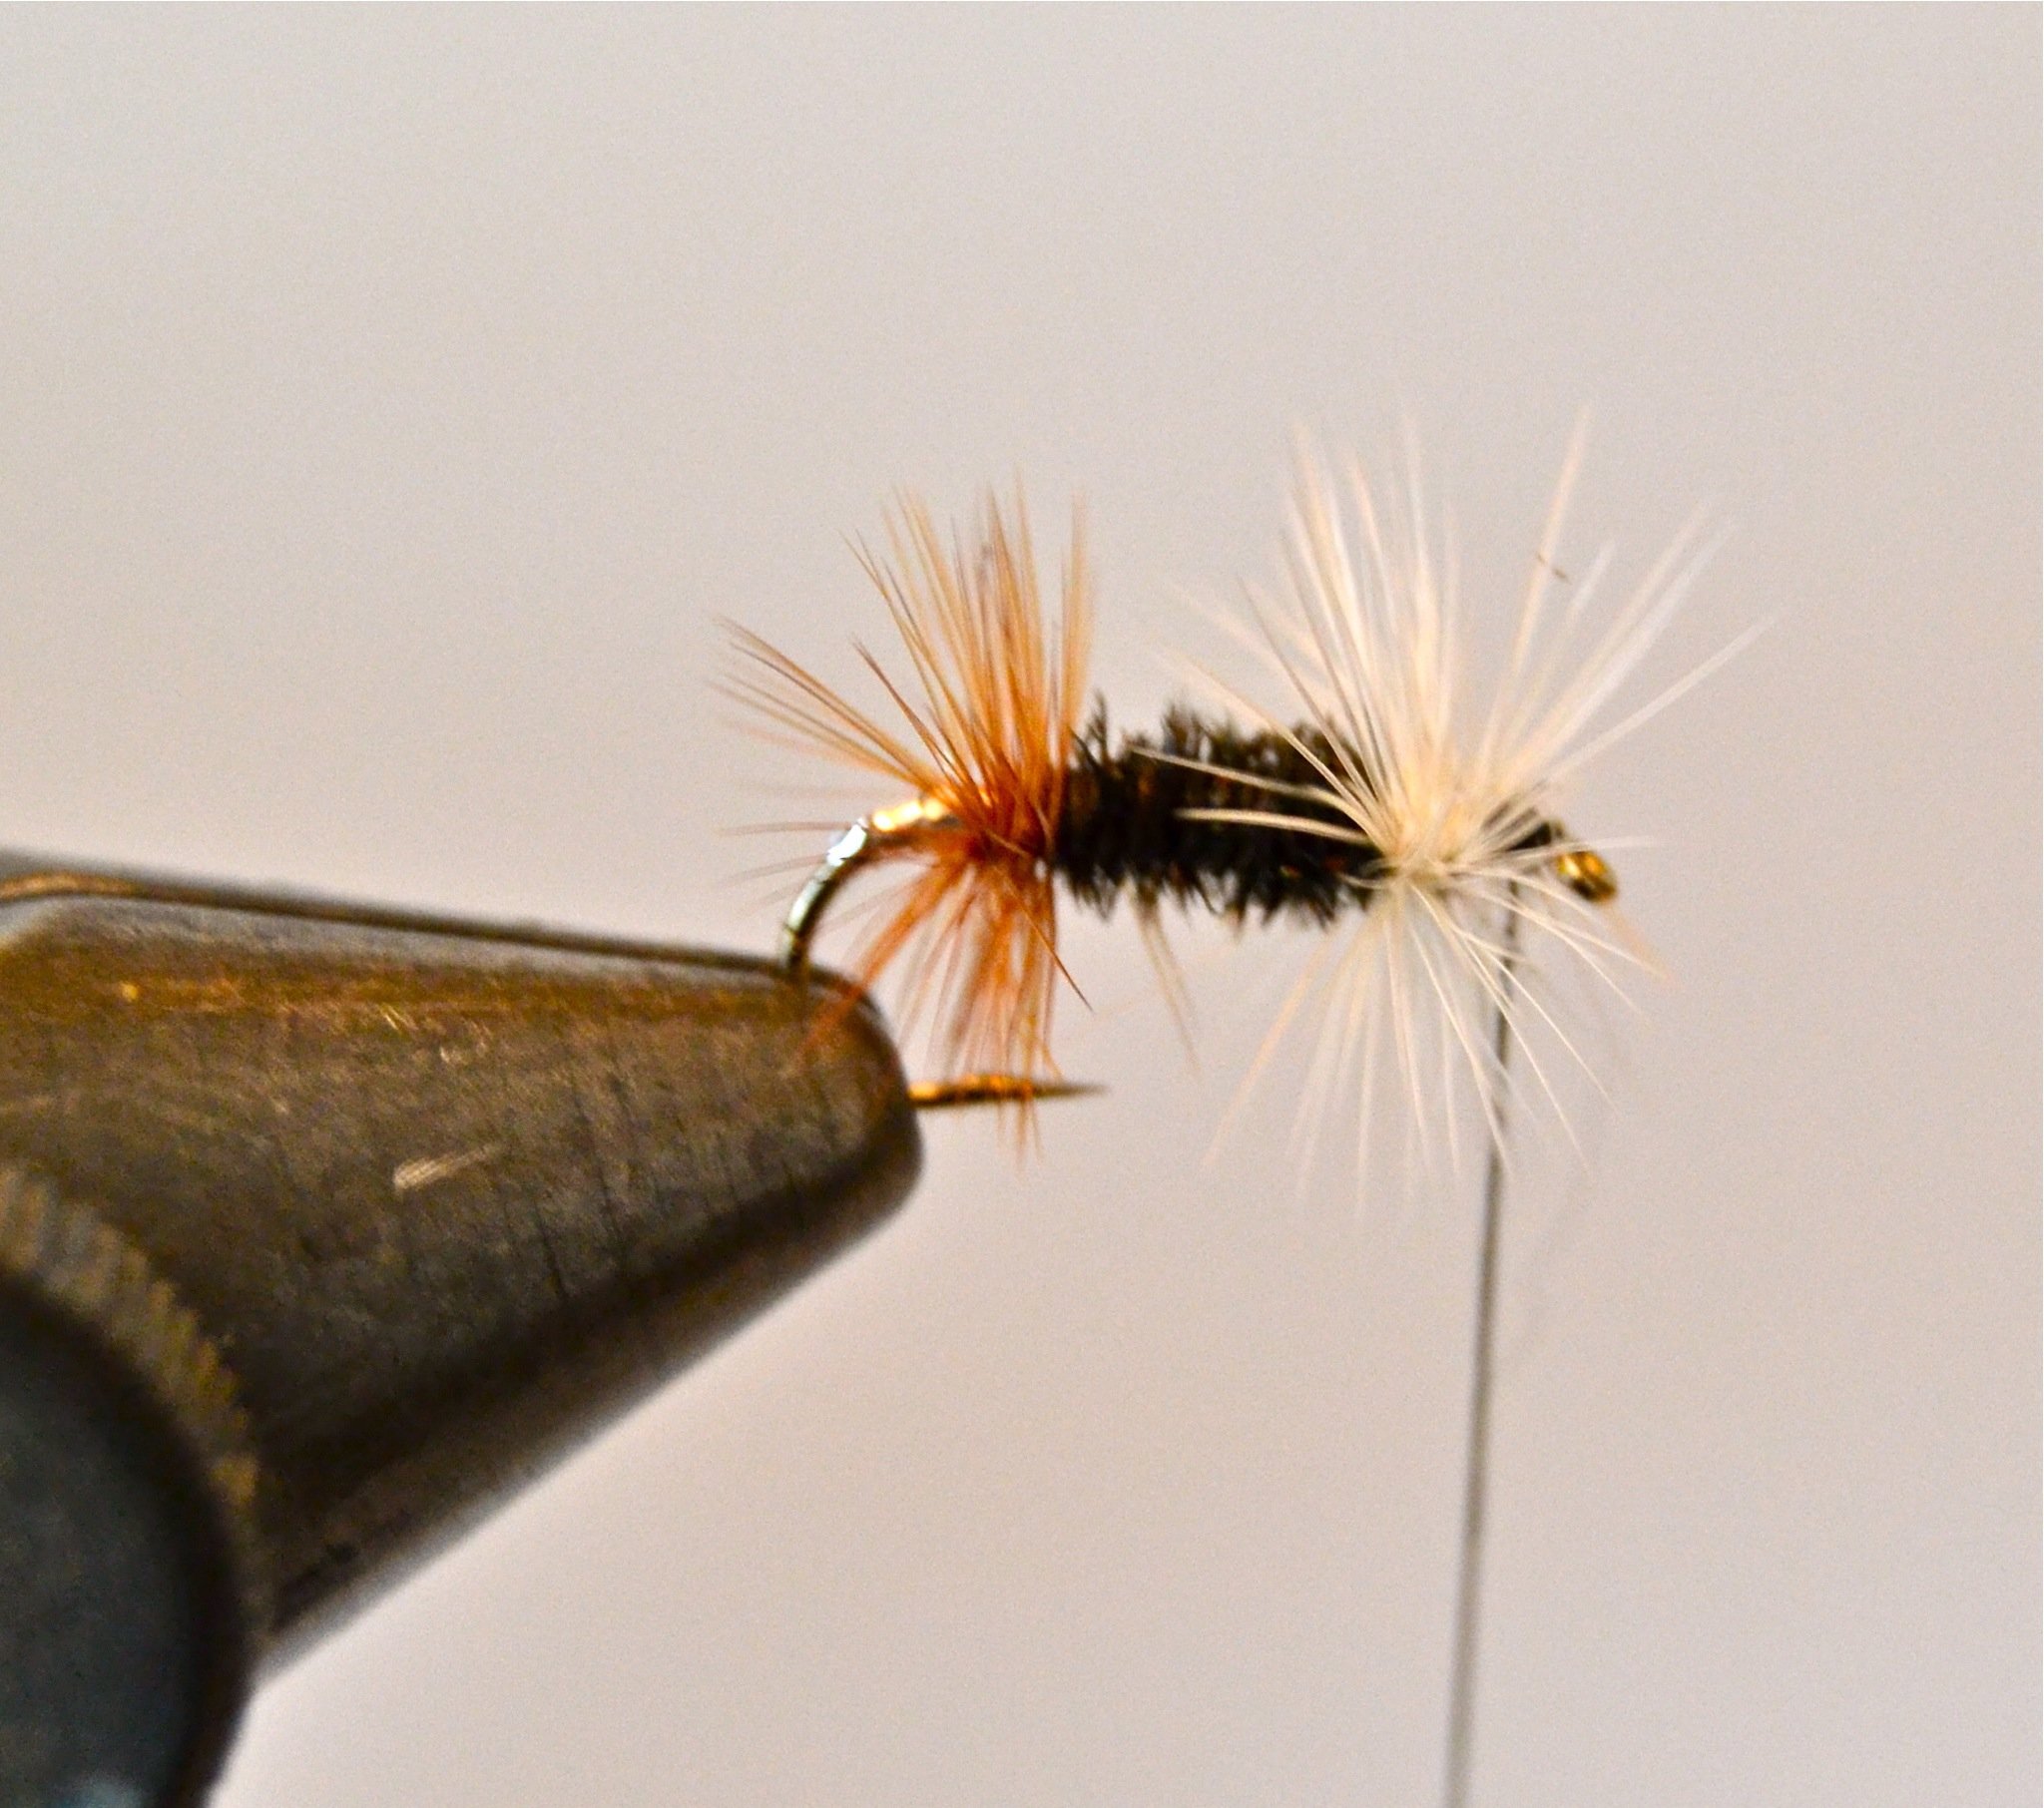 How to tie a renegade fly for fly fishing - B+C Guides